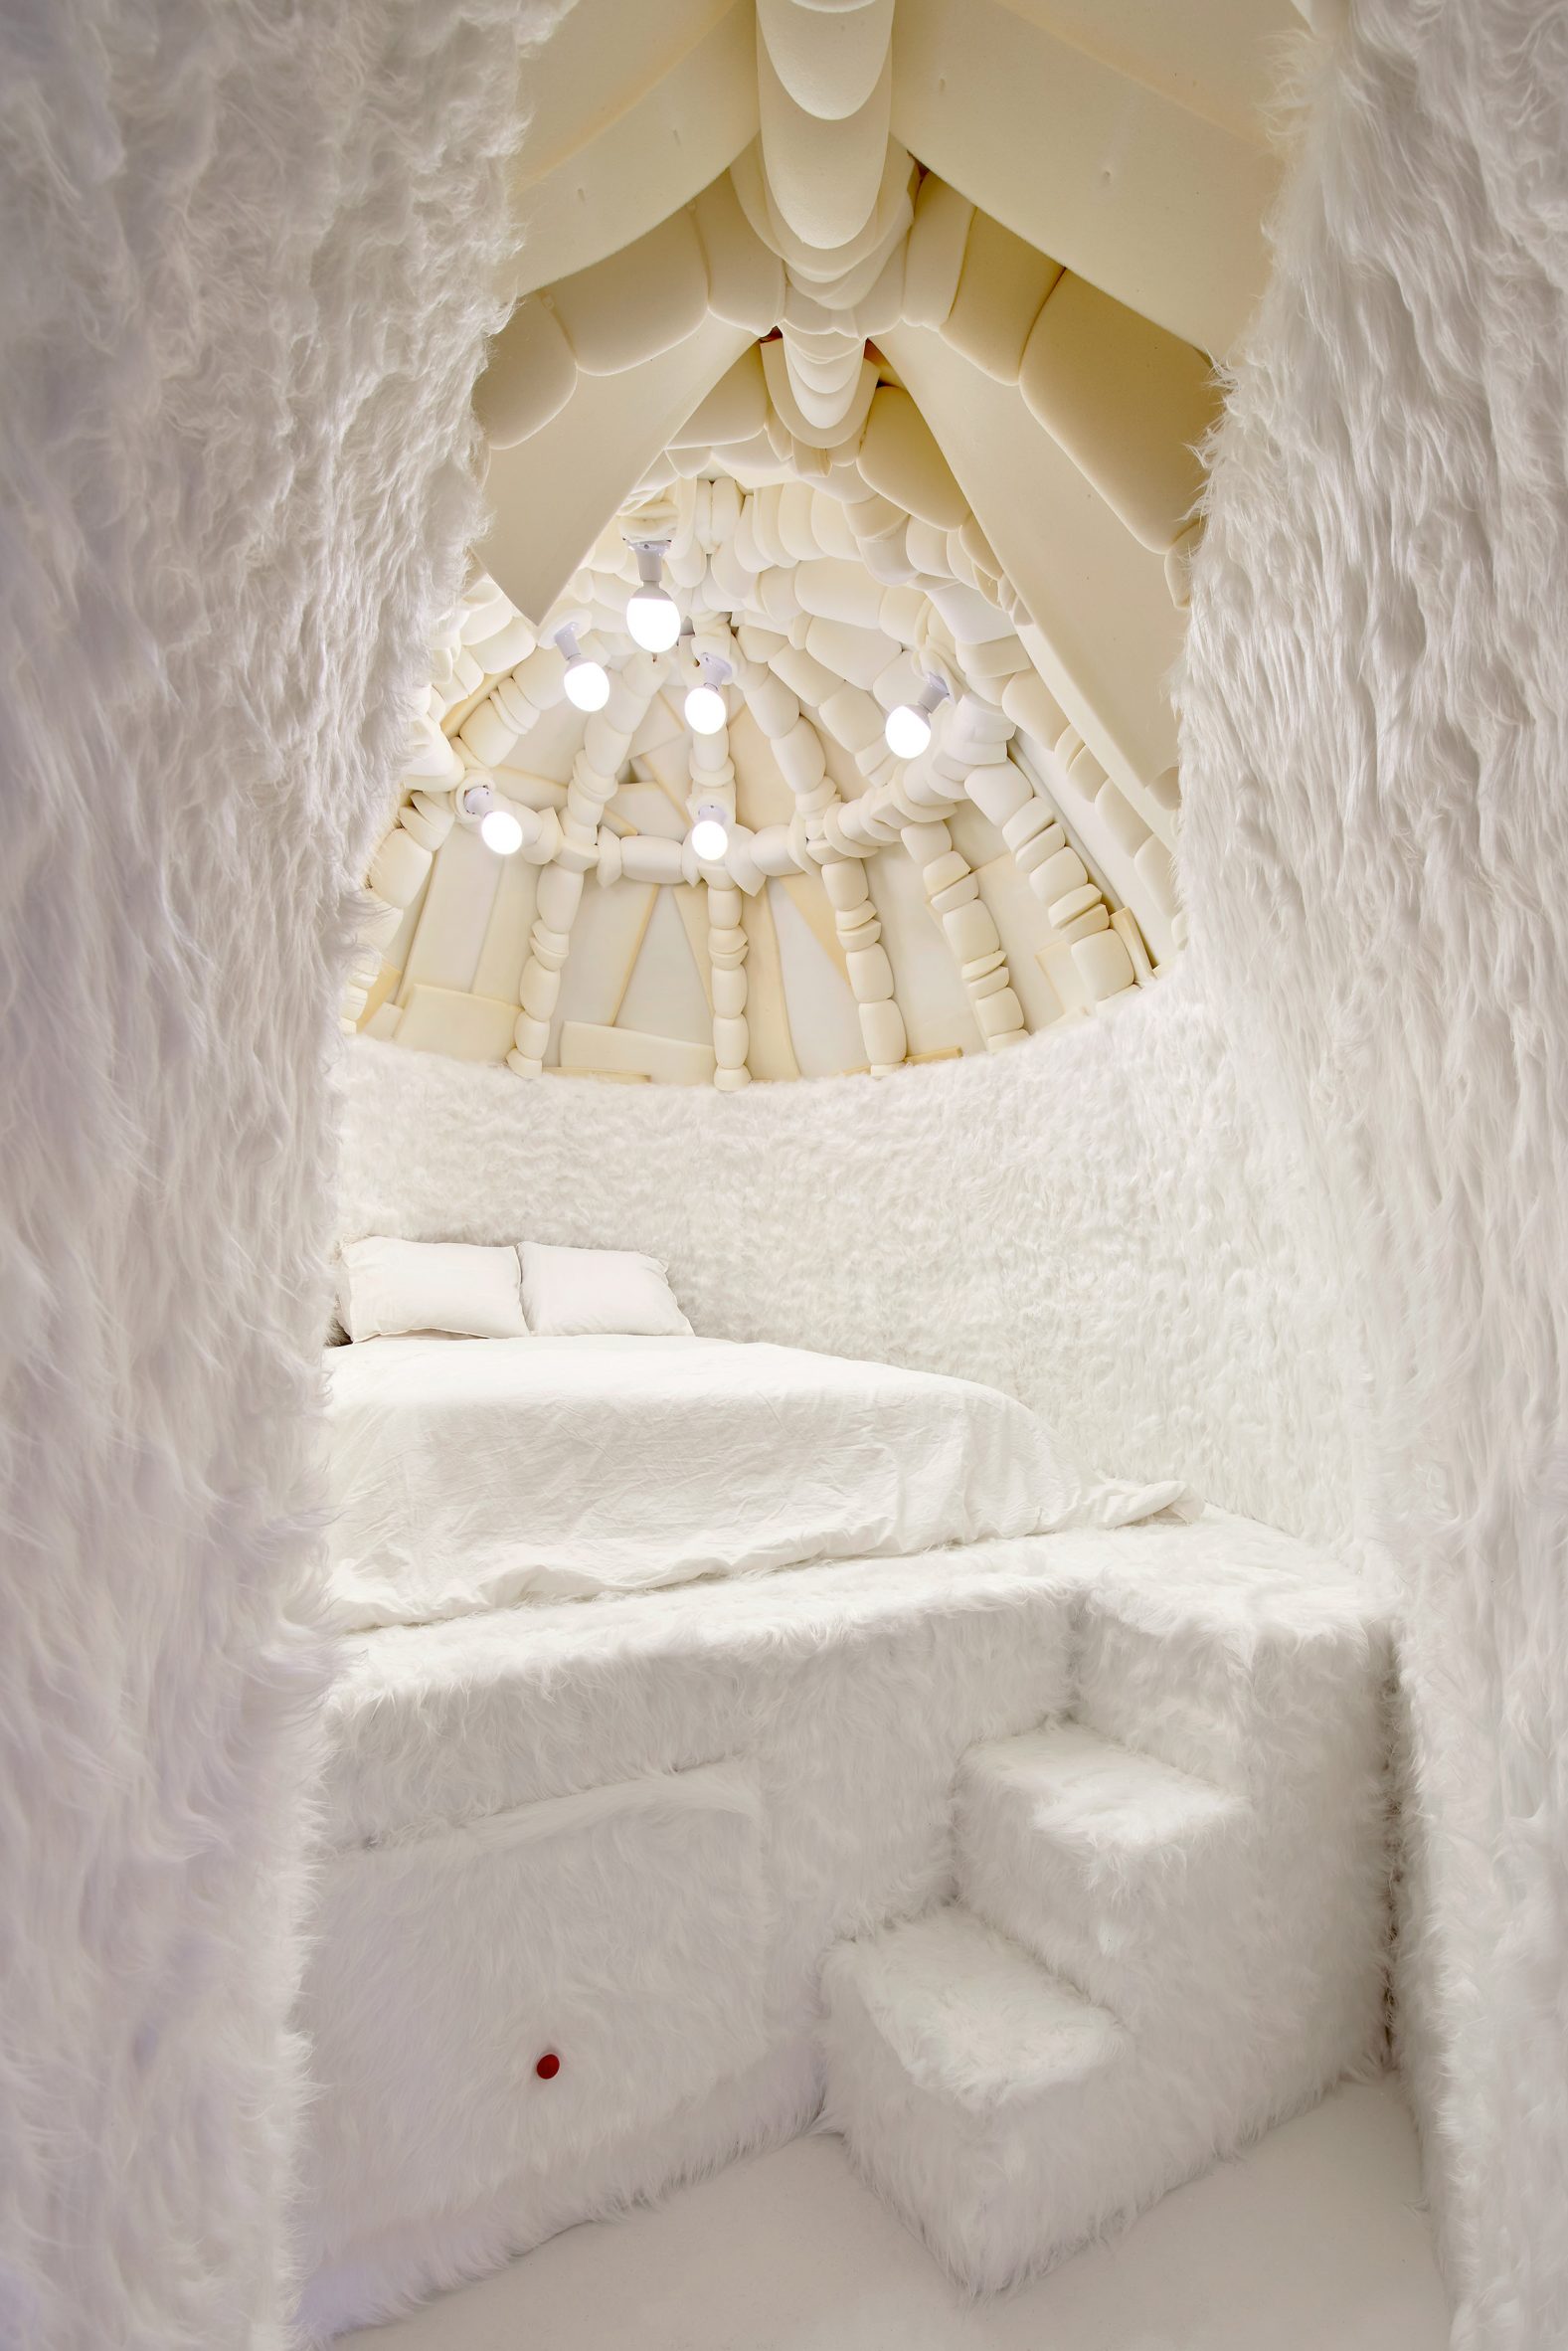 The mattress in the igloo is large enough so that underneath it can be used for storage, playing, and hiding